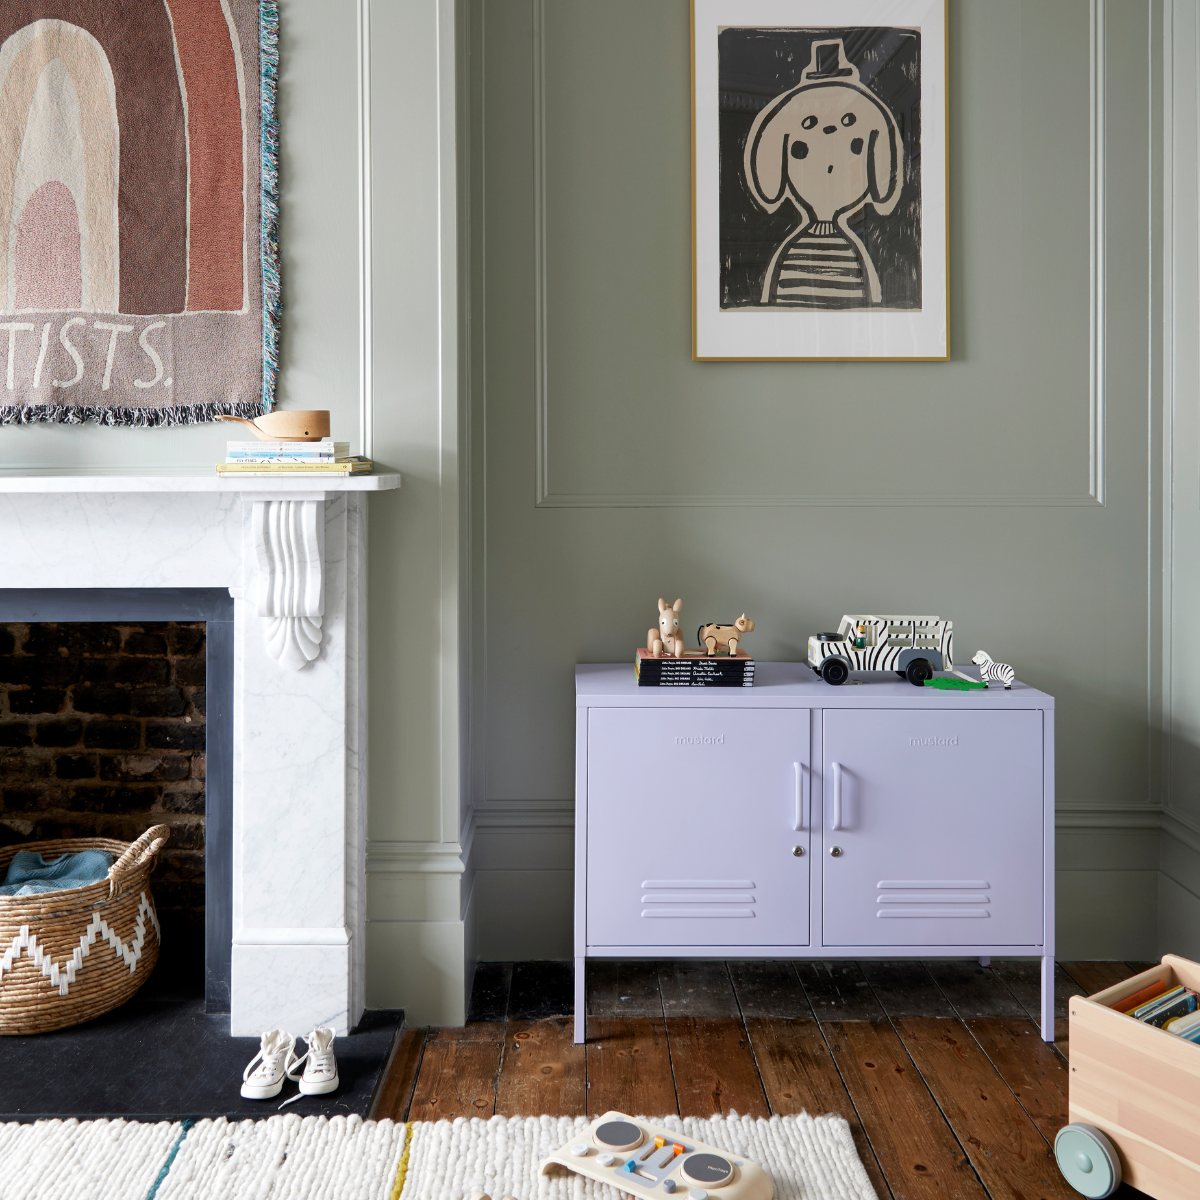 The Lowdown in Lilac sits next to a white marble fireplace.